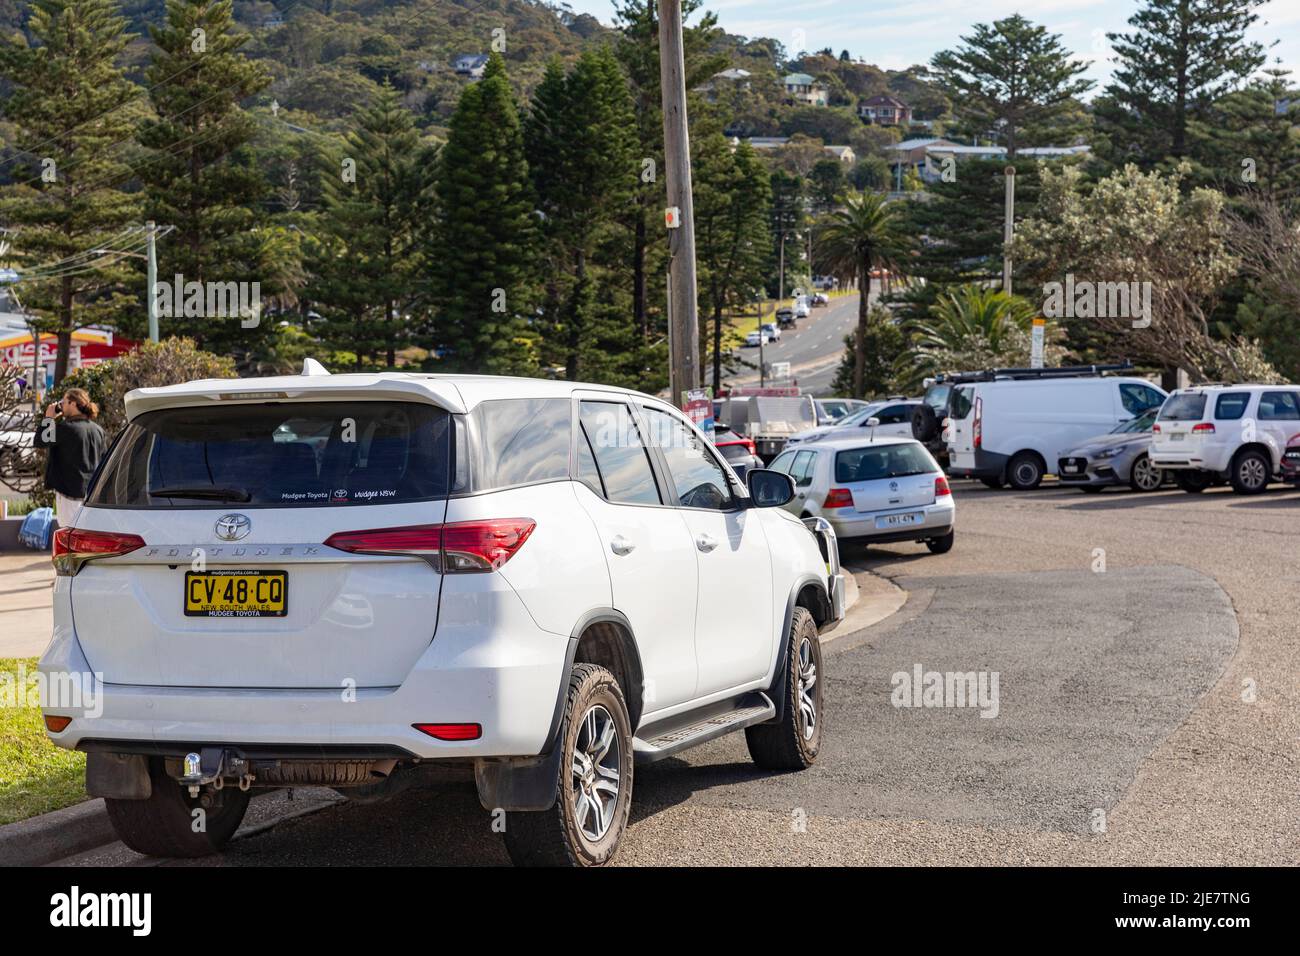 2020 model white Toyota Fortuner parked in Avalon Beach Sydney , a mid sized family SUV type vehicle also known as Toyota Hilux SW4,Australia Stock Photo